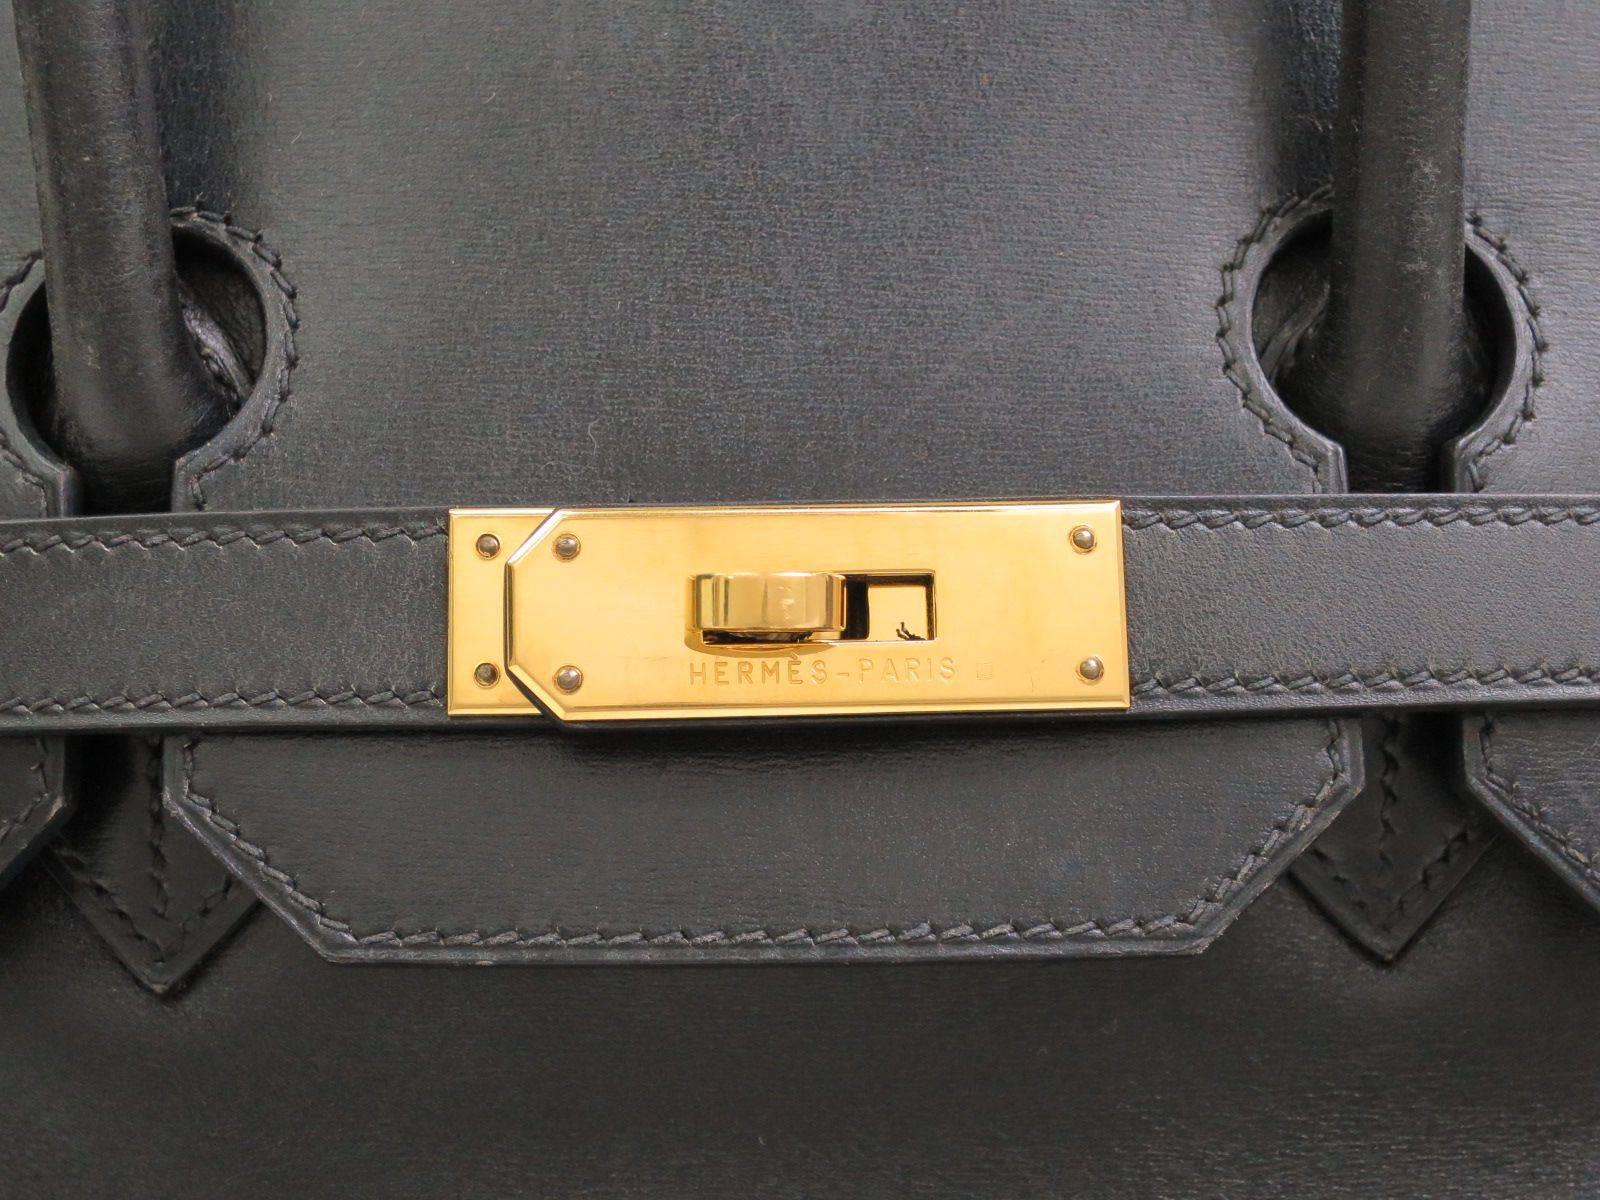 CURATOR'S NOTES

PRICE REDUCED for a limited time only!

Because you've earned it: Gorgeous Hermes Birkin 35 featuring box calf leather and gold hardware.

Box Calf
Gold hardware
Made in France
Date code Square F (2002)
Measures 13.8